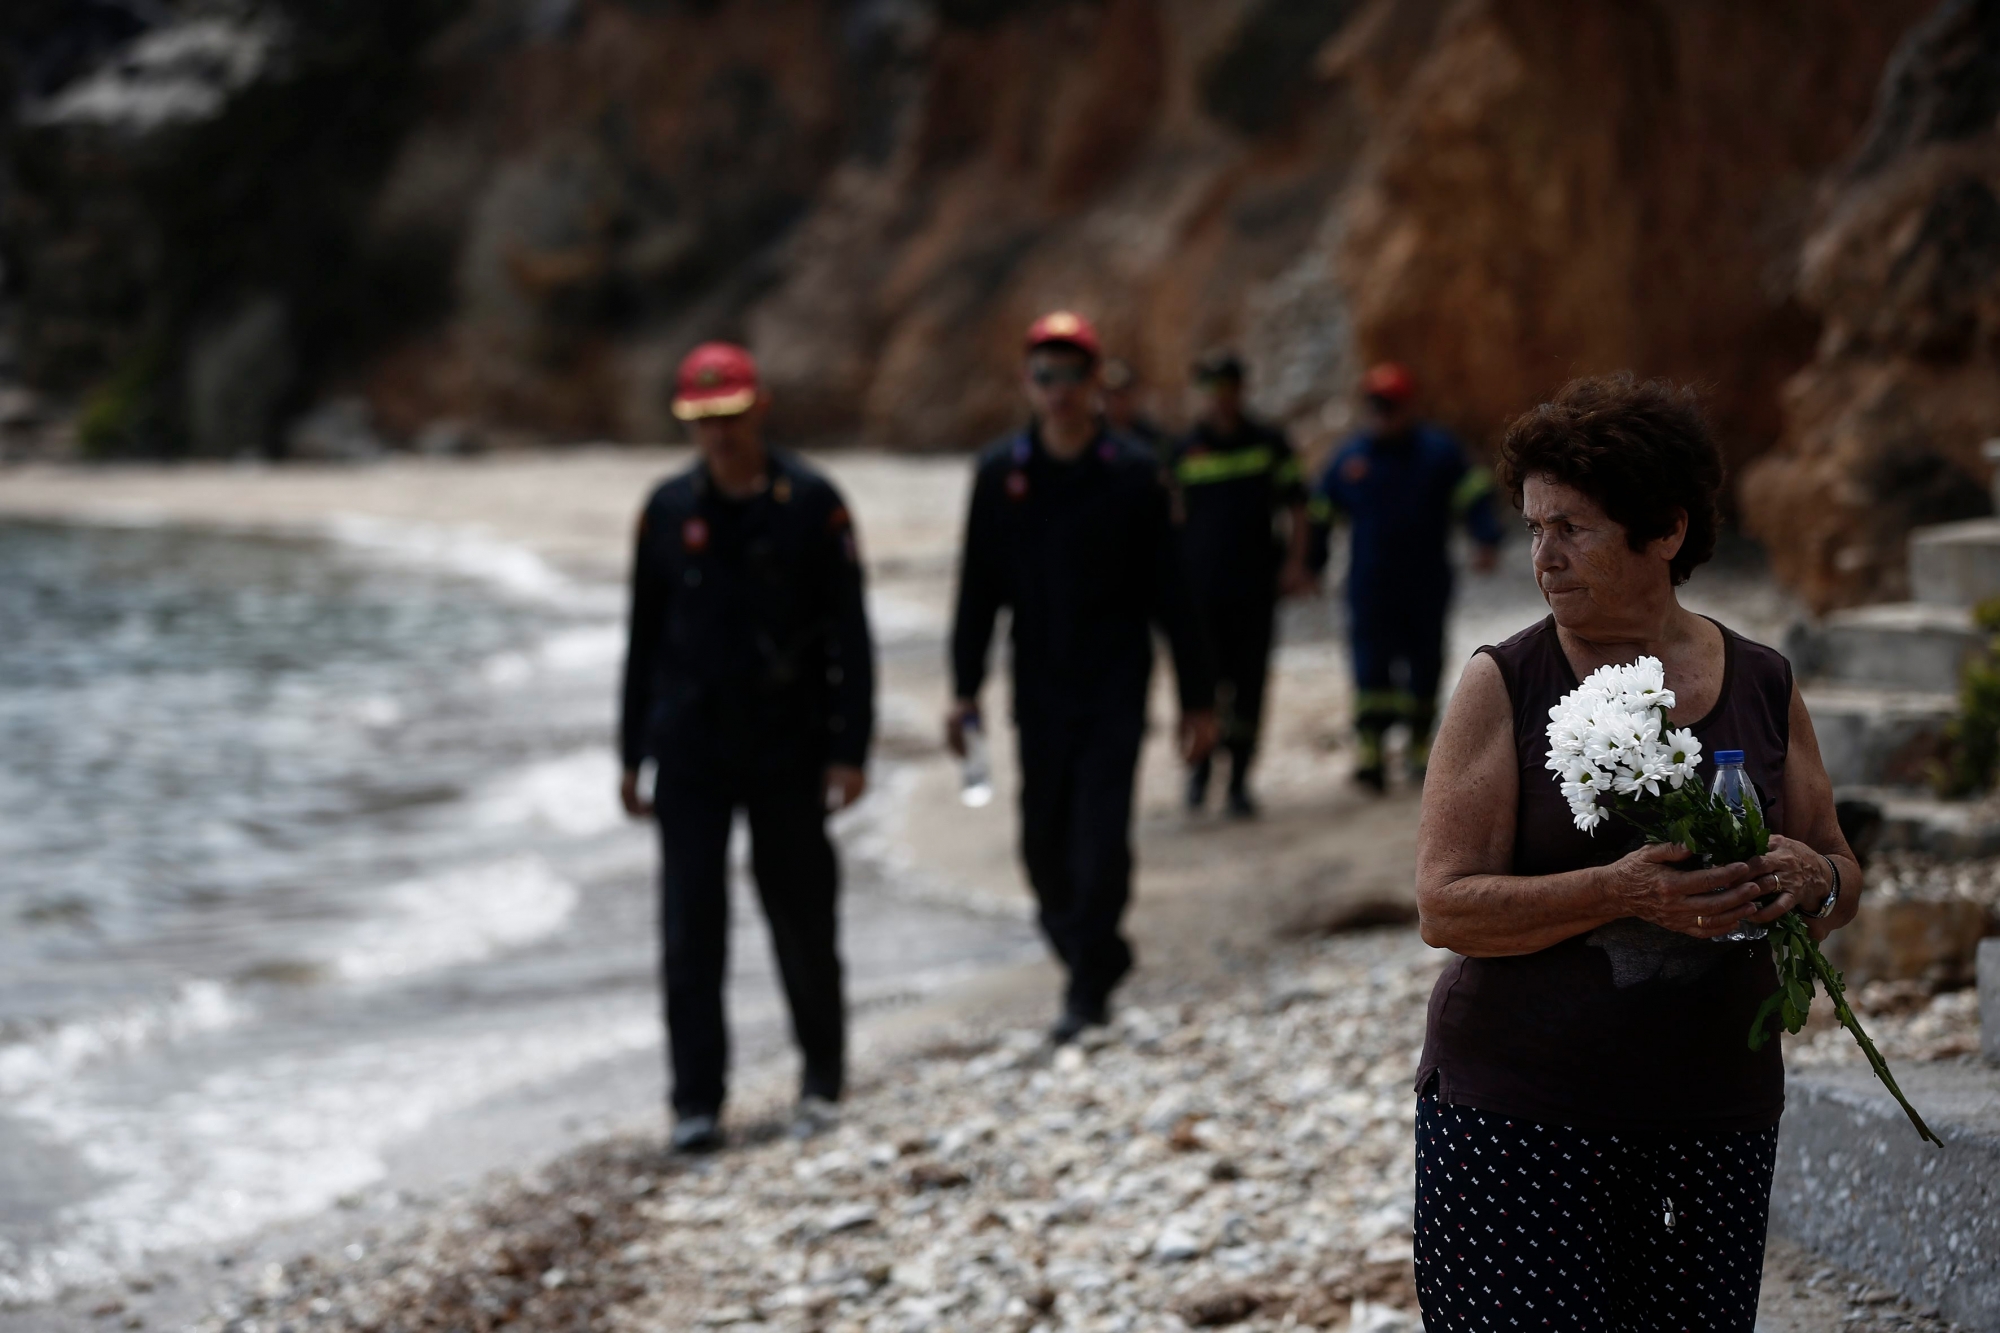 epa06914199 Greek firefighters search for missing people, as Fotini Matrakidis holds flowers next to the point where a six month baby died, following a deadly forest fire in Mati, a northeast suburb of Athens, Greece, 27 July 2018. The confirmed death toll from forest fires that raged through seaside resorts near the Greek capital Athens has increased to 87. According to an announcement by Fire Brigade, the search for more missing persons in the burnt out buildings in eastern Attica is continuing.  EPA/YANNIS KOLESIDIS GREECE WILDFIRE AFTERMATH